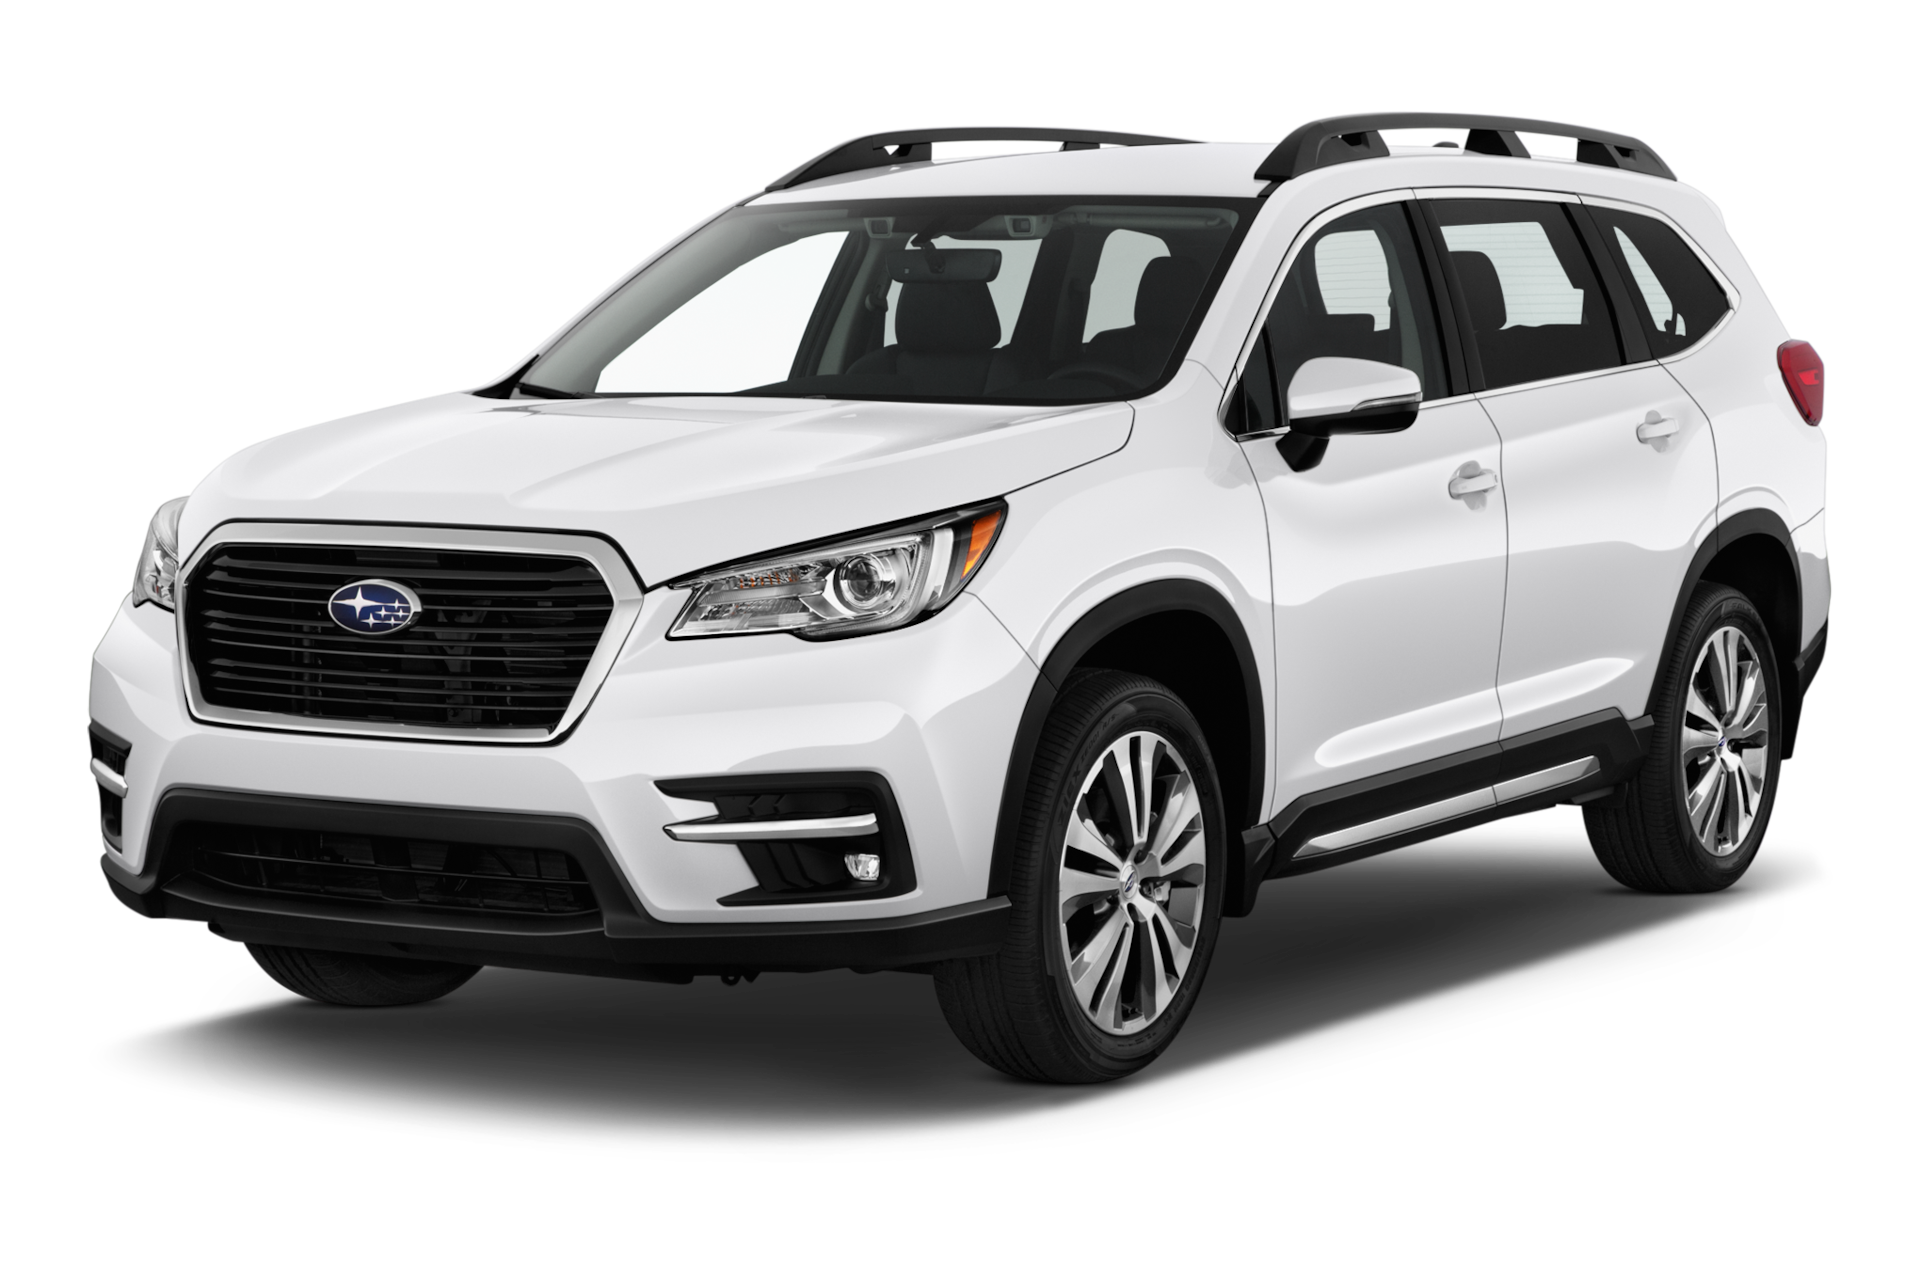 2019 Subaru Ascent Prices, Reviews, and Photos - MotorTrend